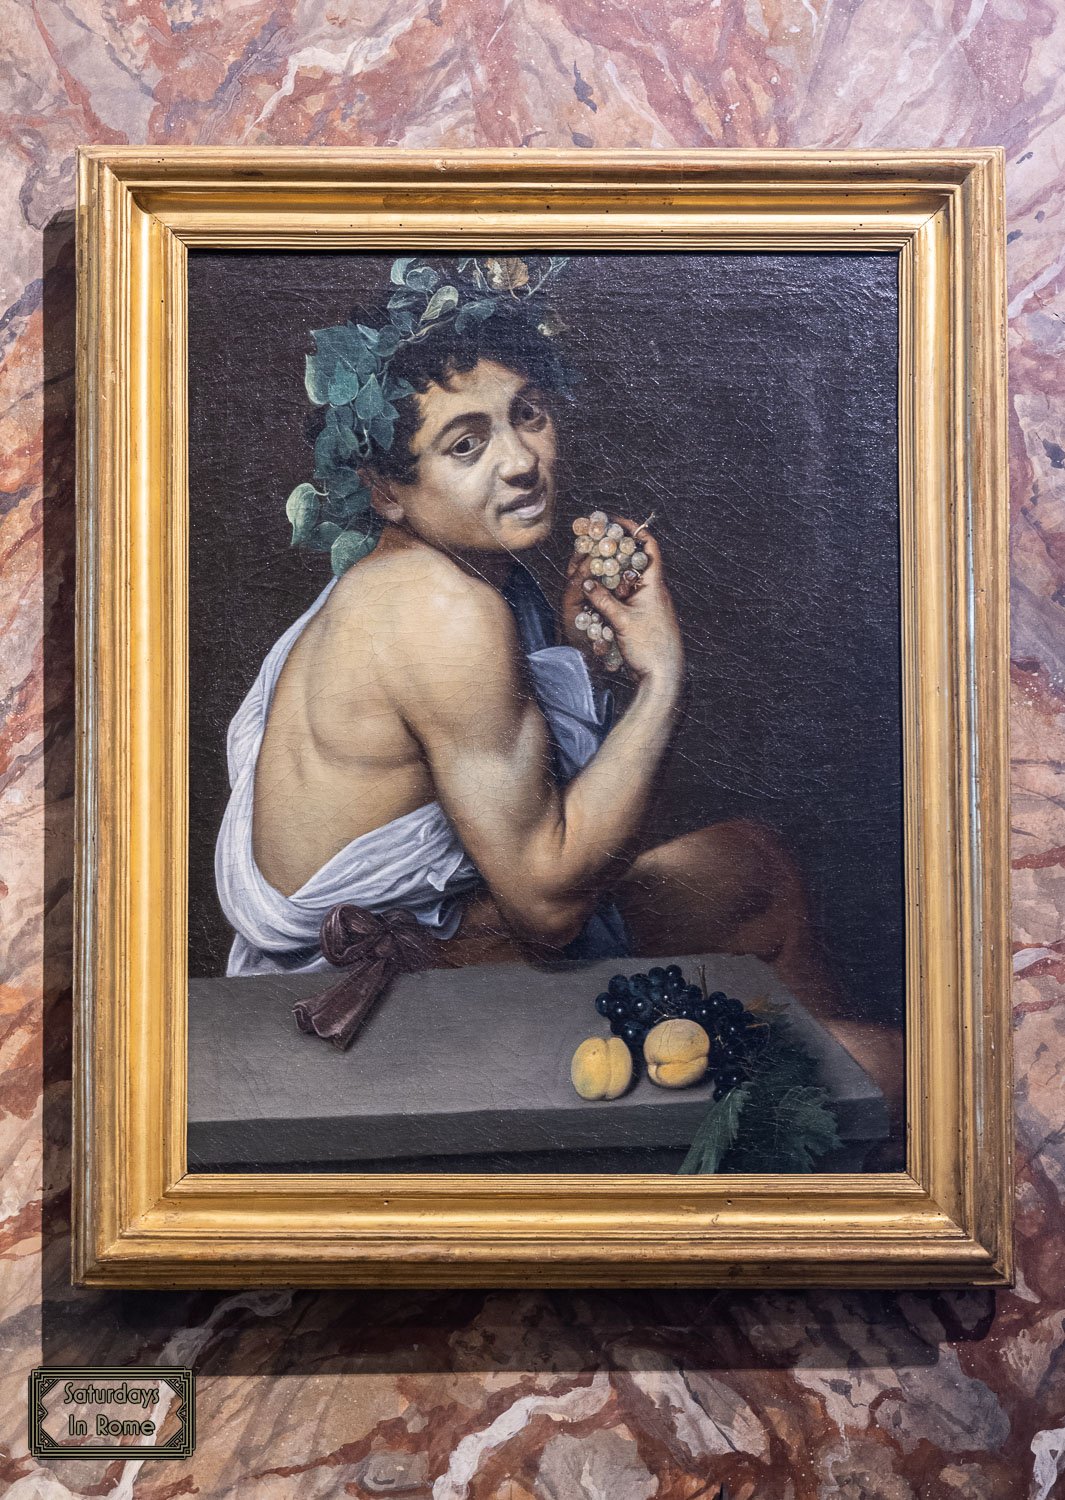 borghese gallery and museum - Caravaggio - The Sick Bacchus